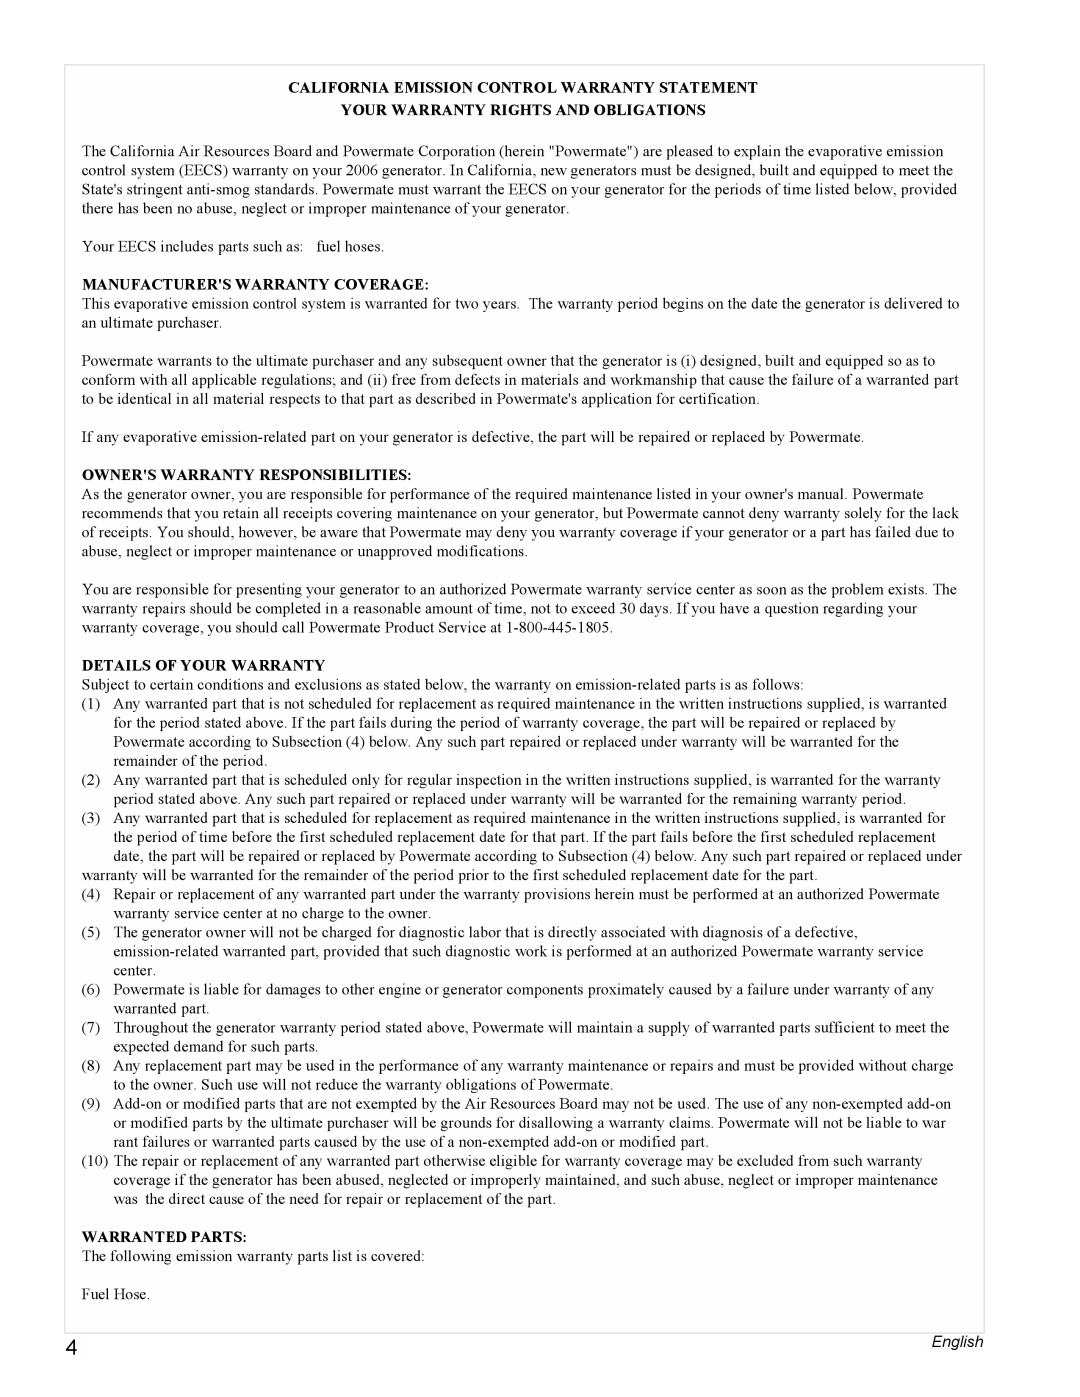 Powermate PMC496500 California Emission Control Warranty Statement, Your Warranty Rights And Obligations, Warranted Parts 